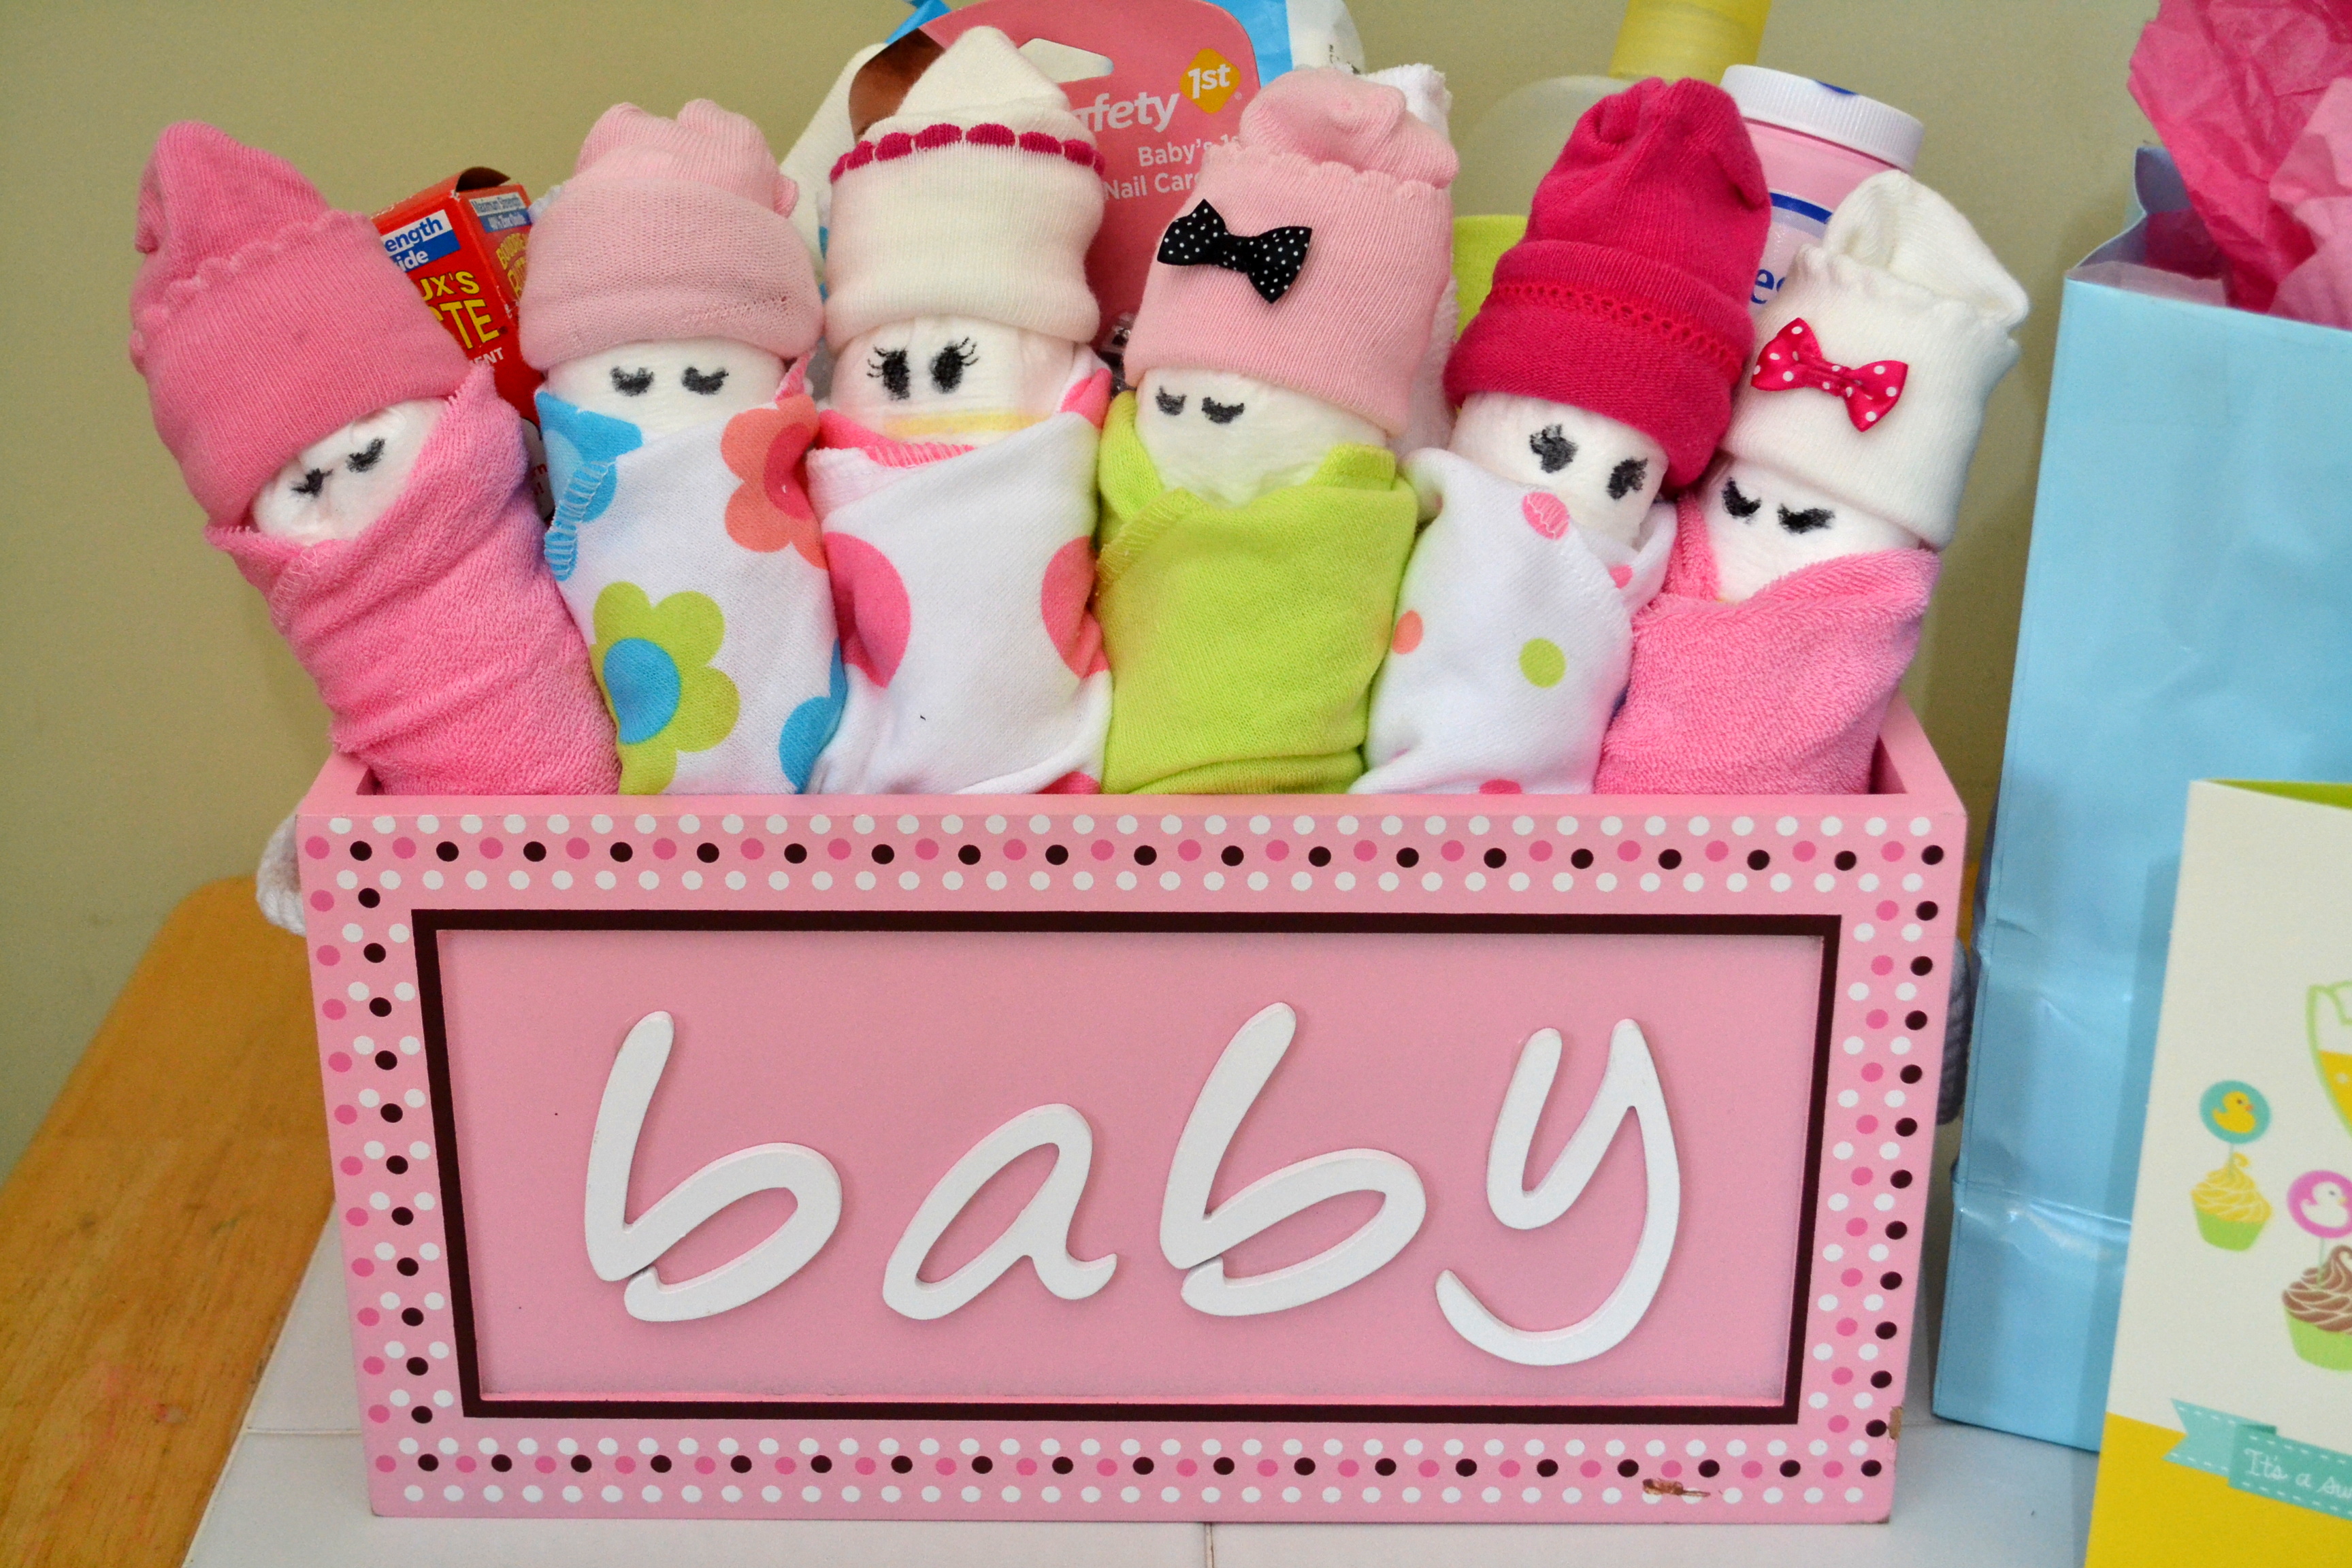 Full Size of Baby Shower:36+ Creative Baby Shower Gift Ideas Photo Designs Baby Shower Gift Ideas Essential Baby Shower Gifts Diy Babies Baby Shower Gifts Babies